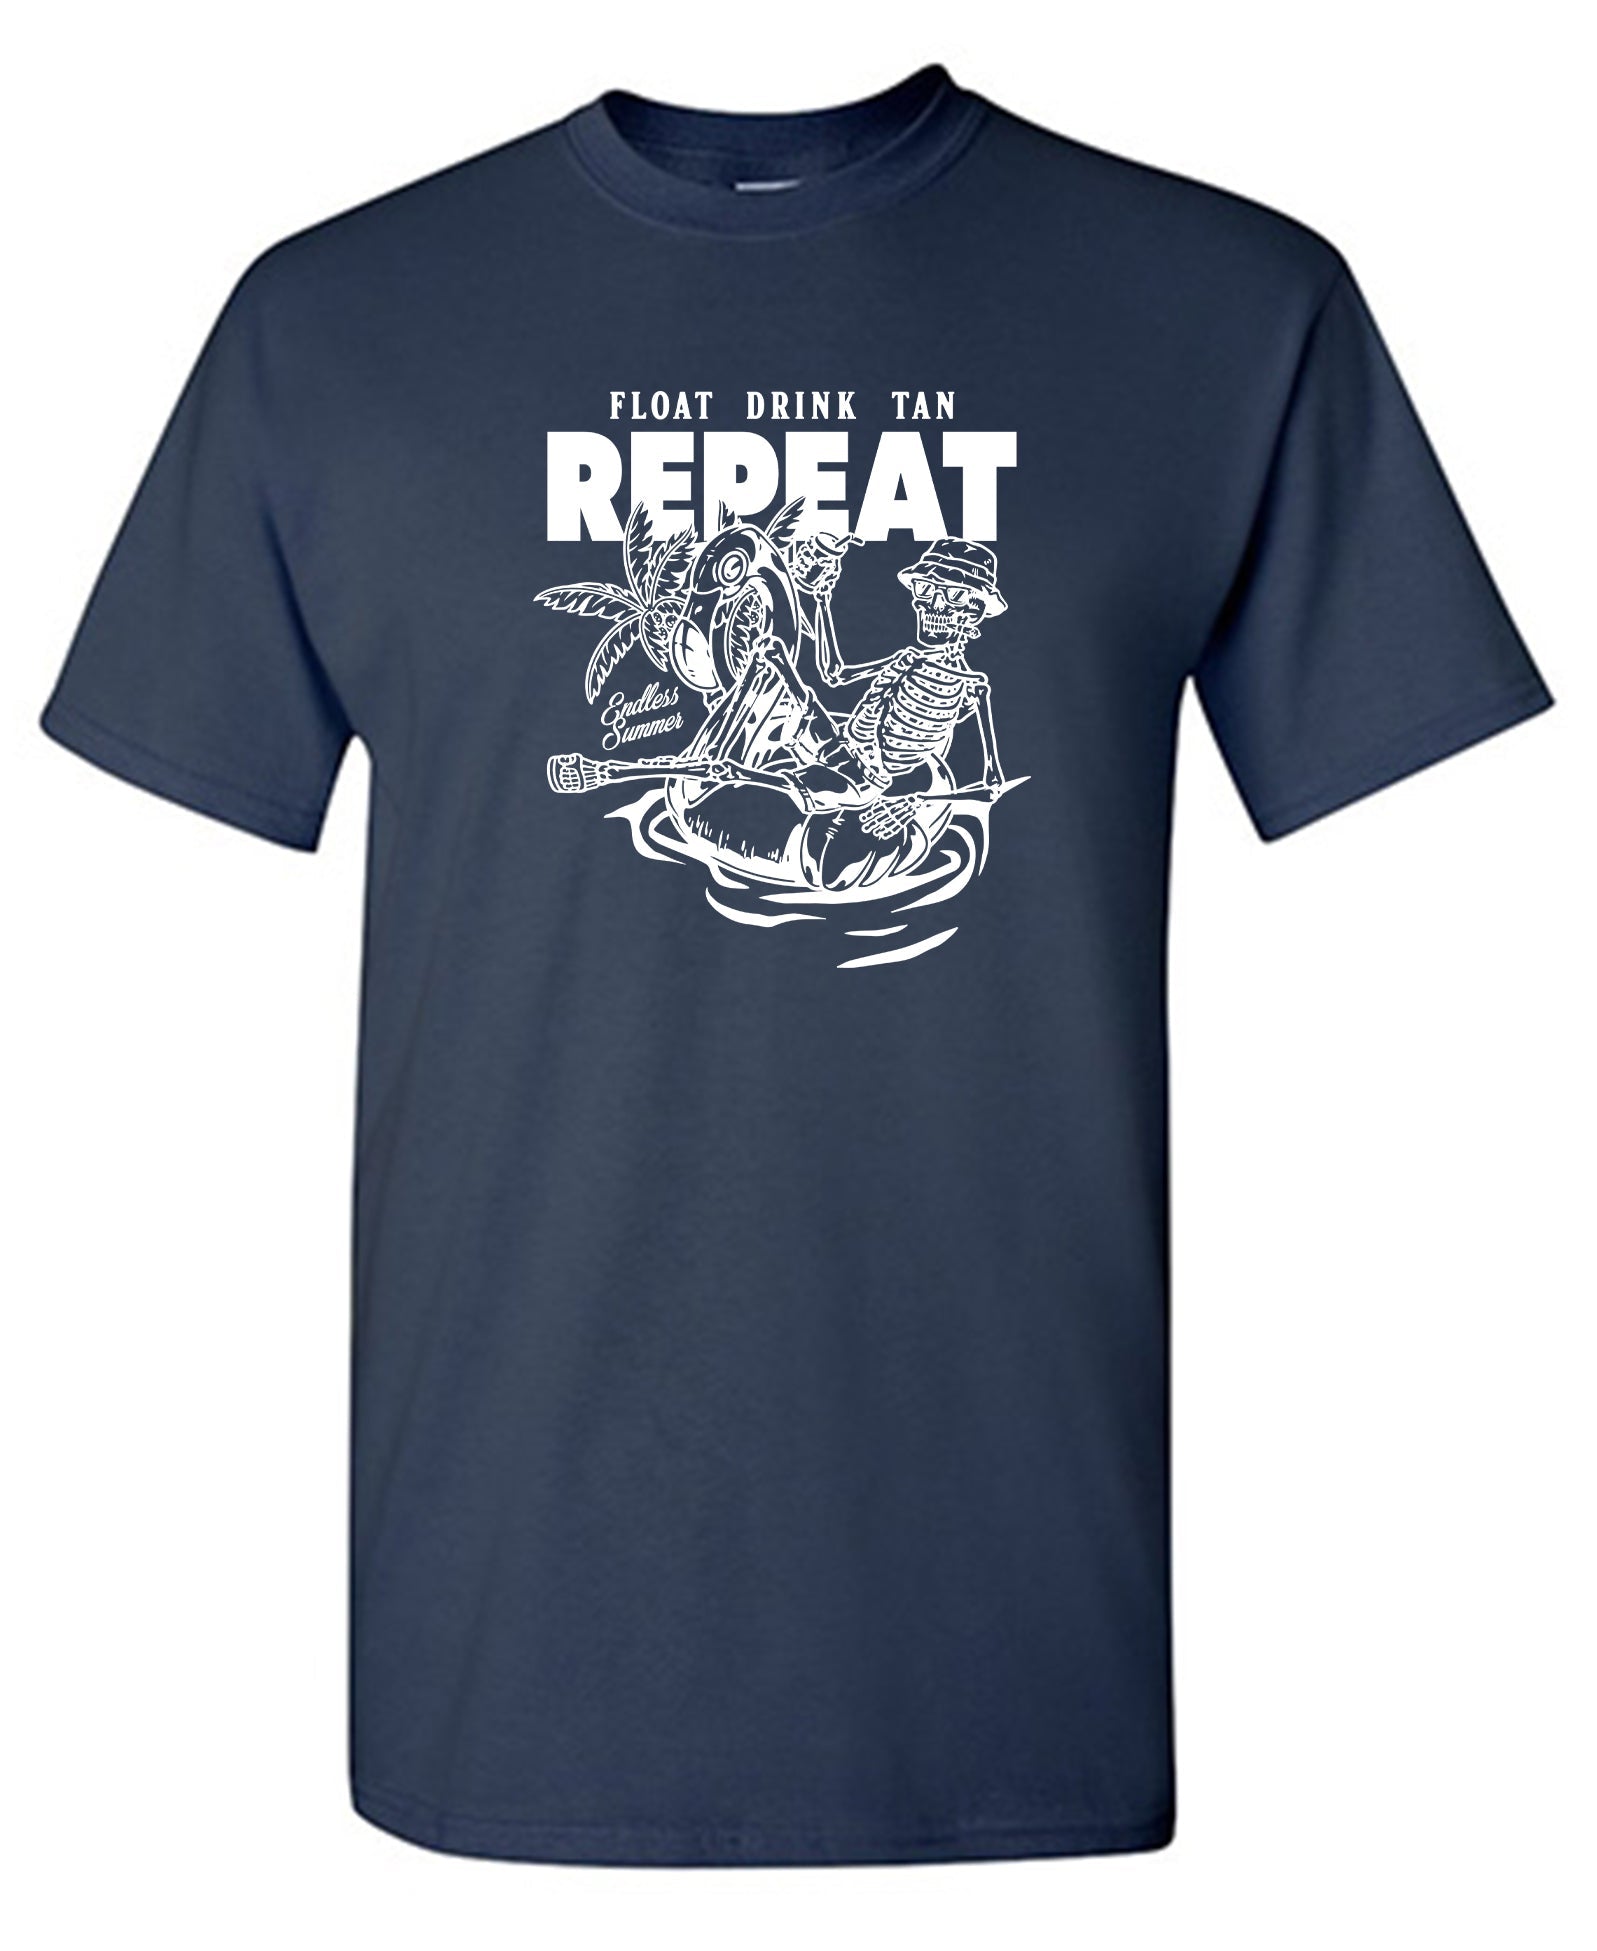 Float Drink Tan Repeat Shirt - Funny T Shirts & Graphic Tees